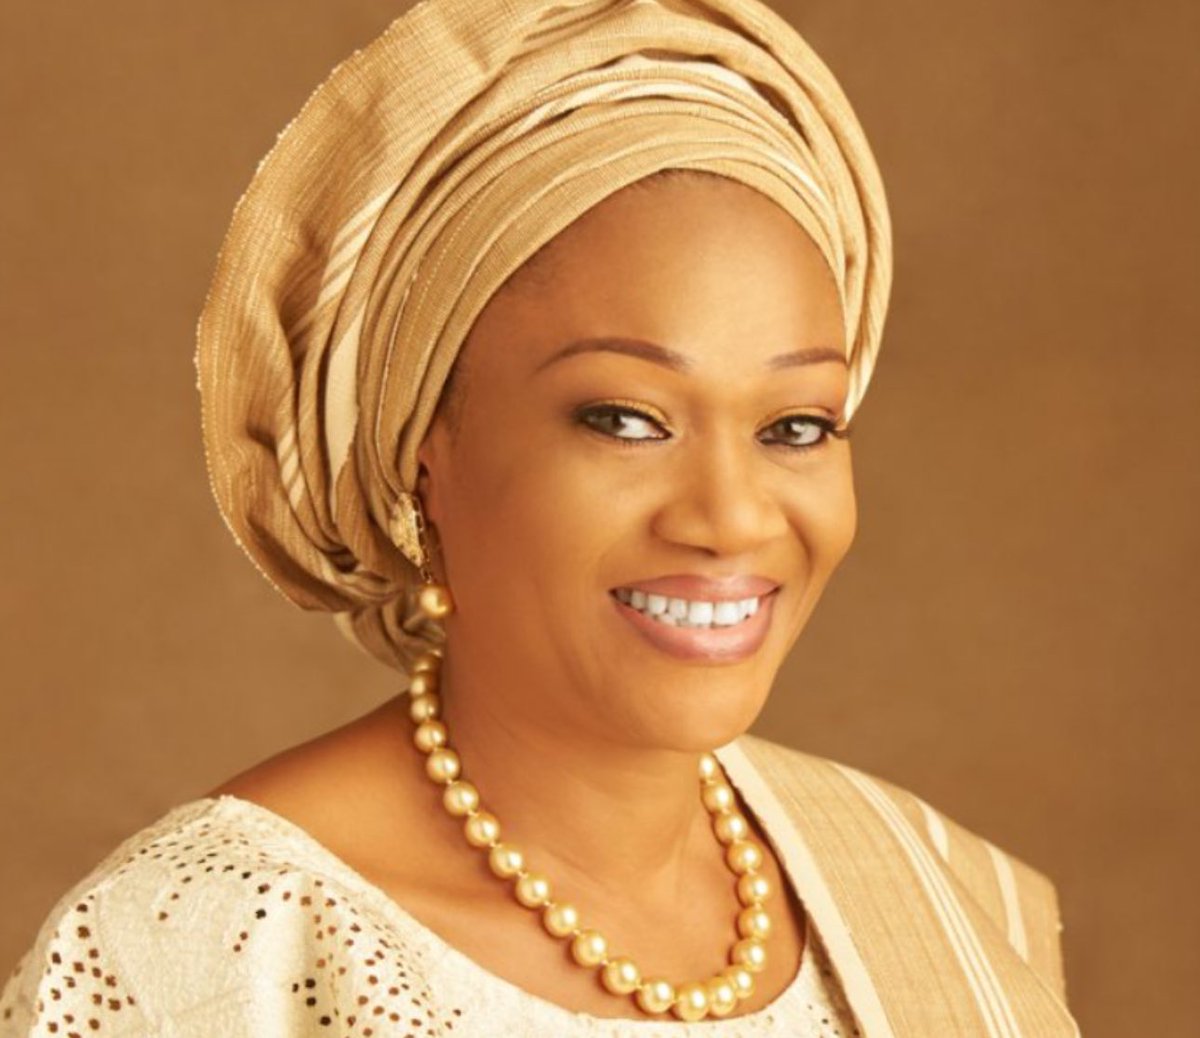 This is the First Lady of Nigeria, Remi Tinubu. Shes very successful, well educated, well spoken and beautiful. With a woman like this as First Lady, I’m certain the girls of Nigeria have excellent role models. Why Meghan Markle felt the need to publicly state that Nigerian girls